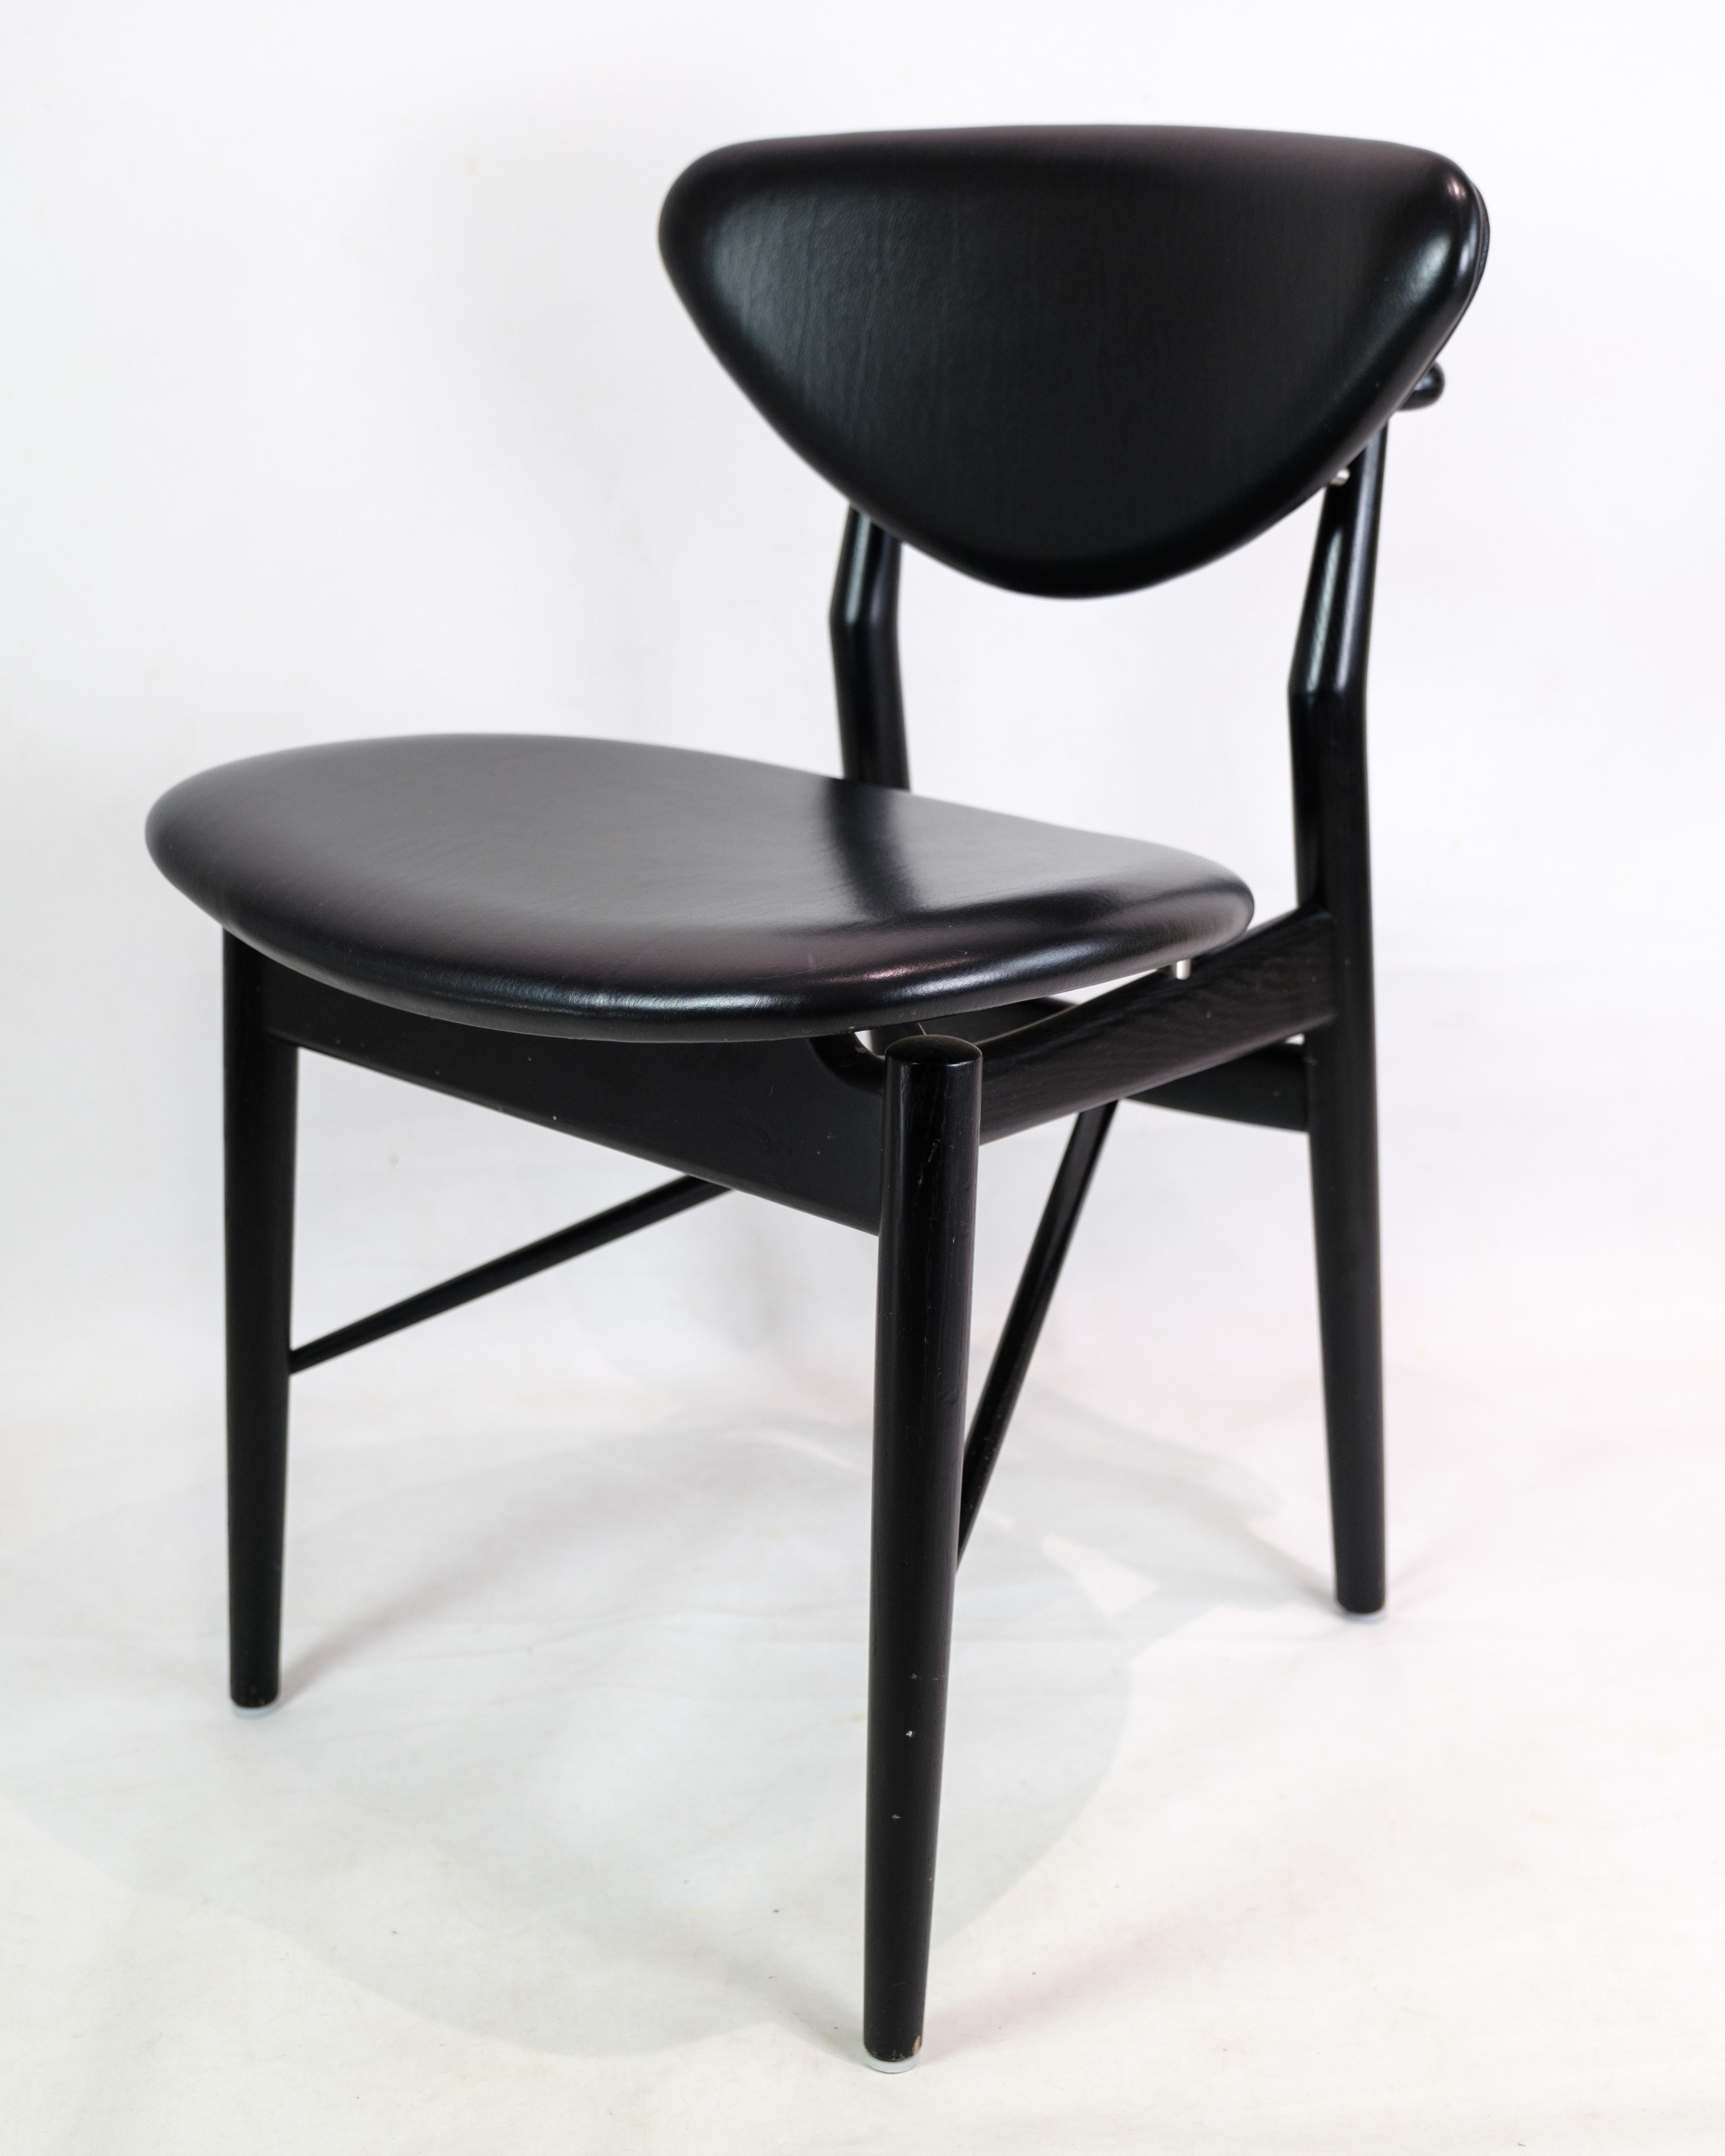 Model 108 Chair, designed by Finn Juhl in black painted oak with black elegance leather of the highest quality produced by the House of Finn Juhl. Finn Juhl's philosophy of separating the load-bearing from the carried, and creating space and spaces,